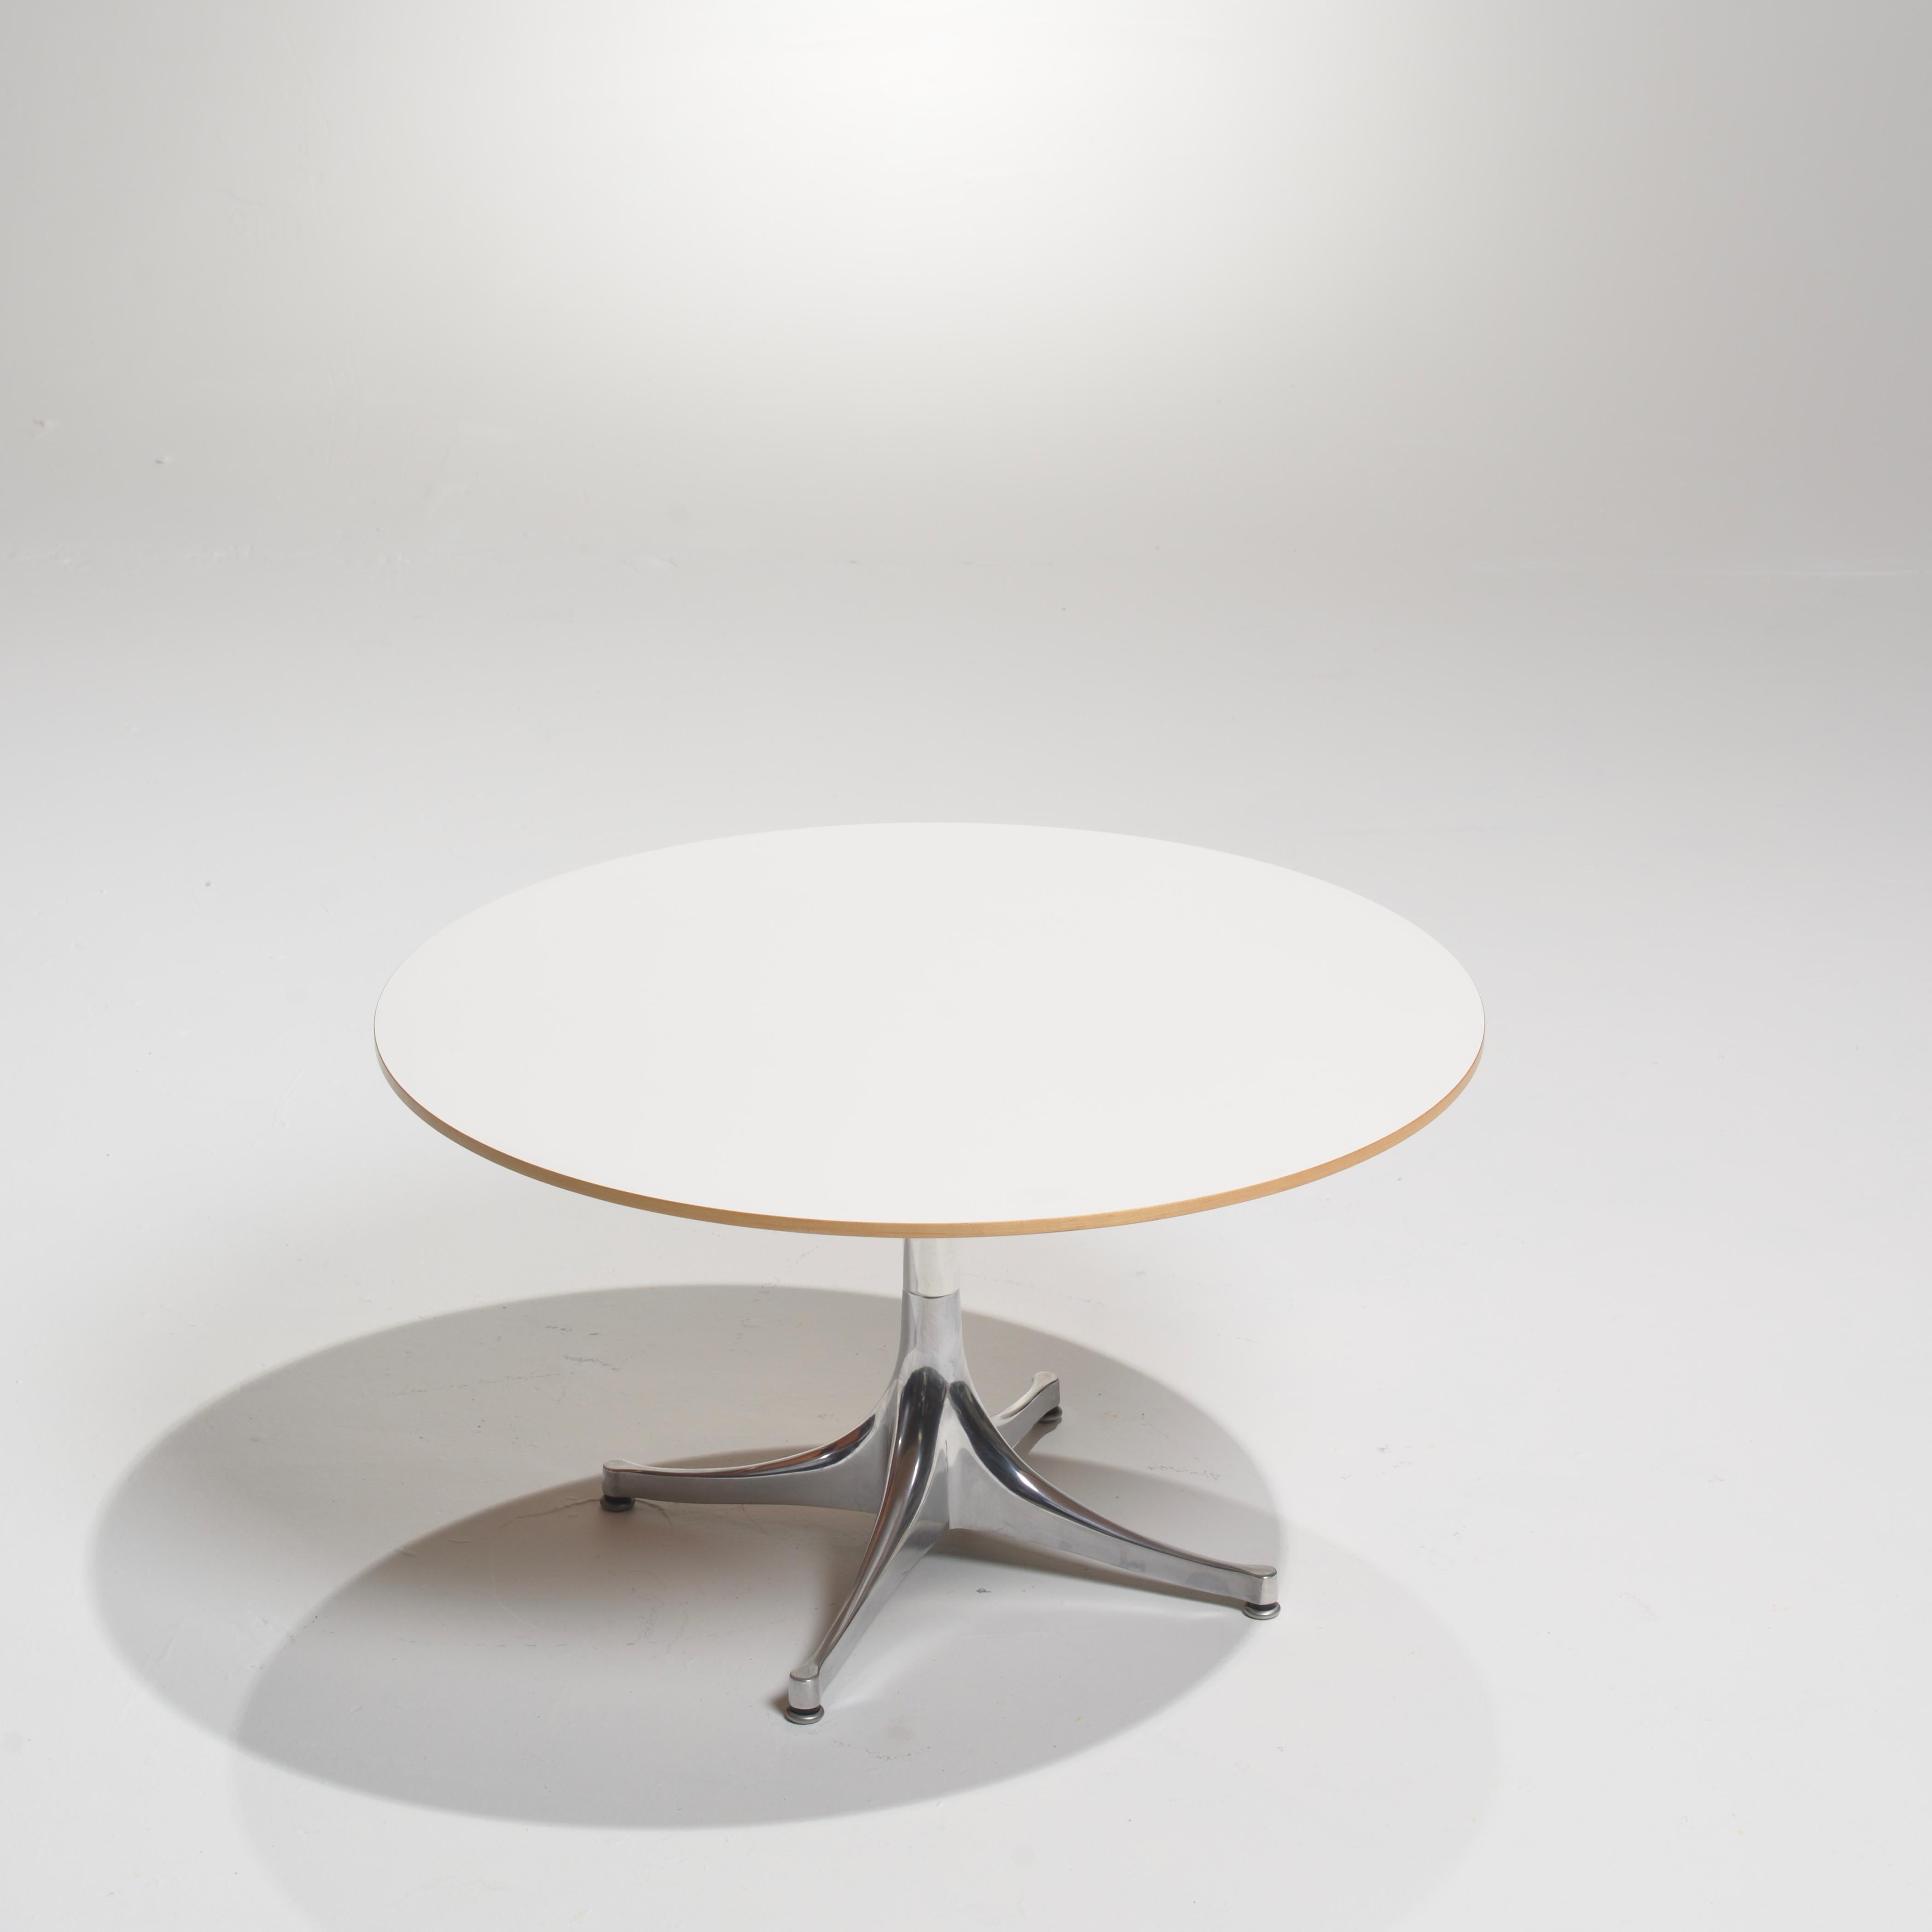 This is George Nelson's signature end table, characterized by clean lines and practicality. The metal base pedestal looks almost organic as it rises from the floor. First produced in 1954, this version of his end table is 16